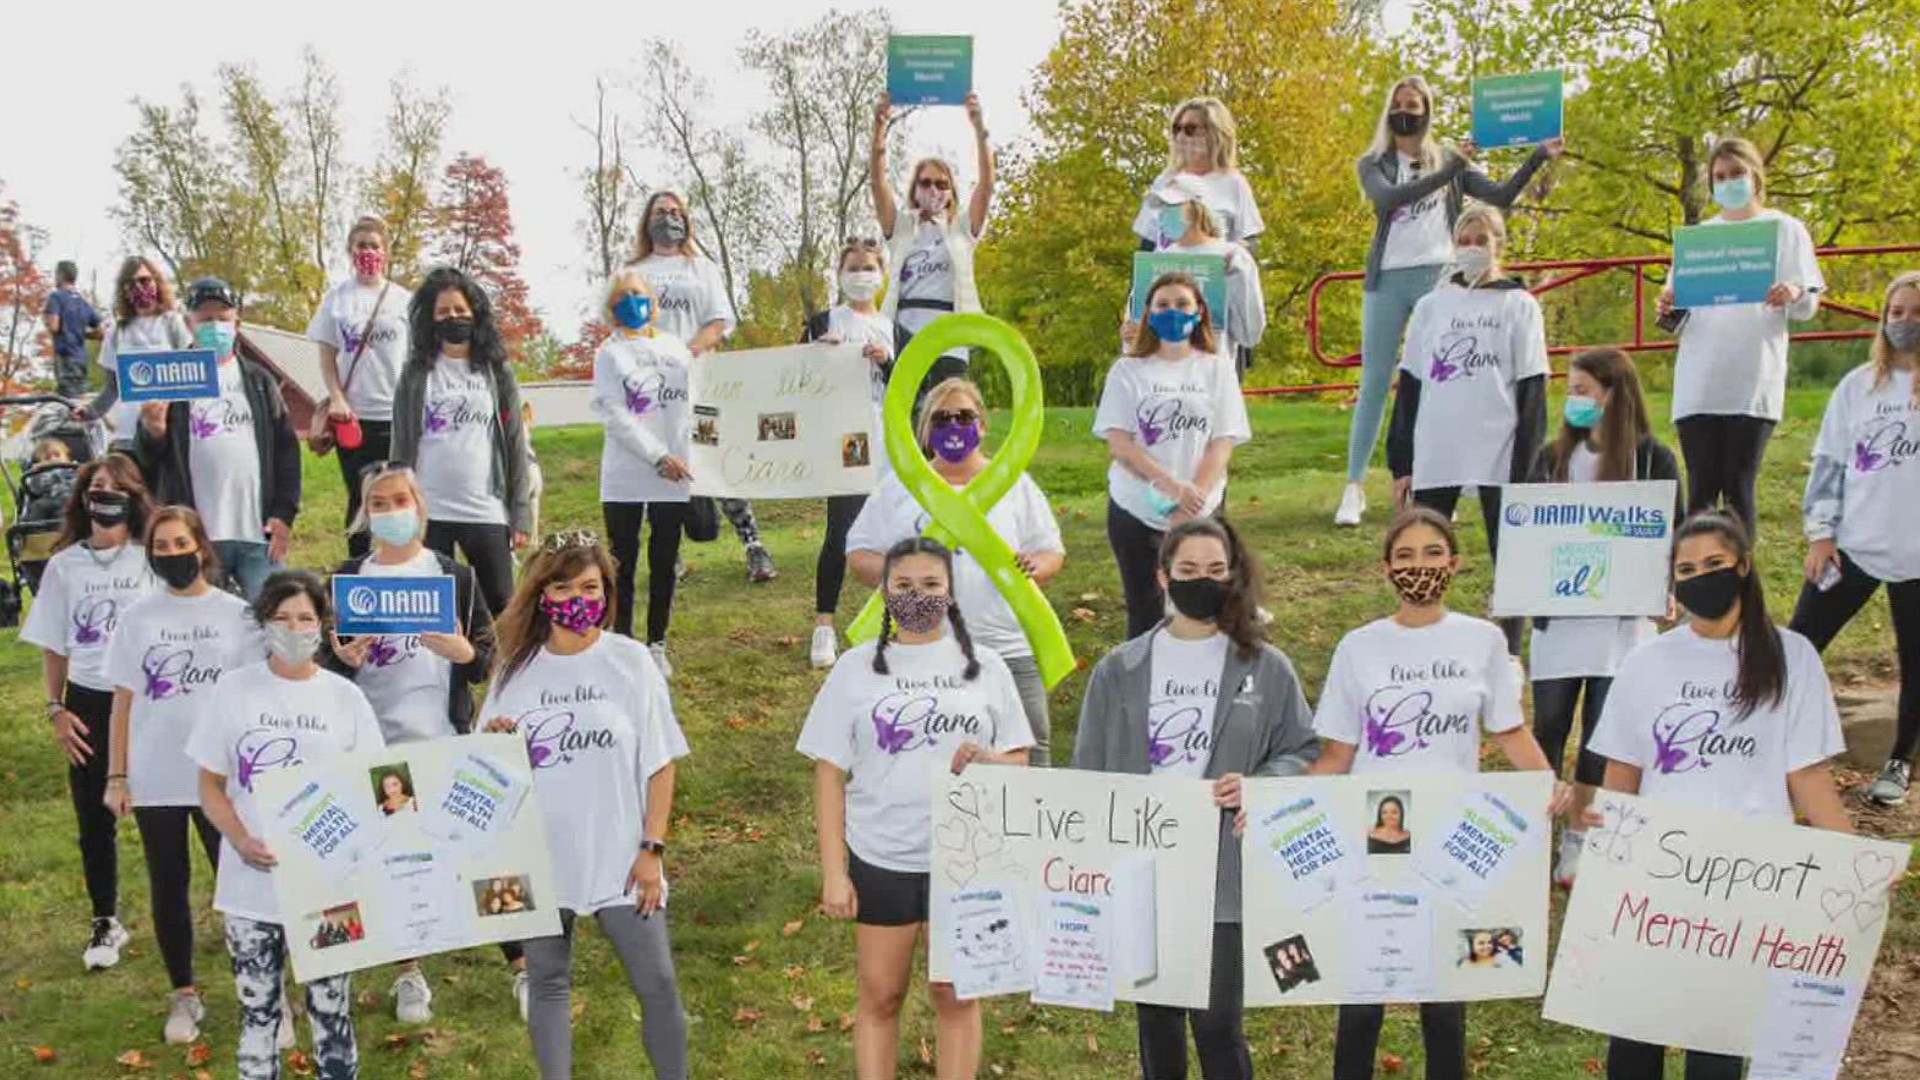 The York-Adams chapter of the National Alliance on Mental Illness will partner with UPMC Memorial Hospital on Oct. 7 for the annual Mental Health Awareness Walk.